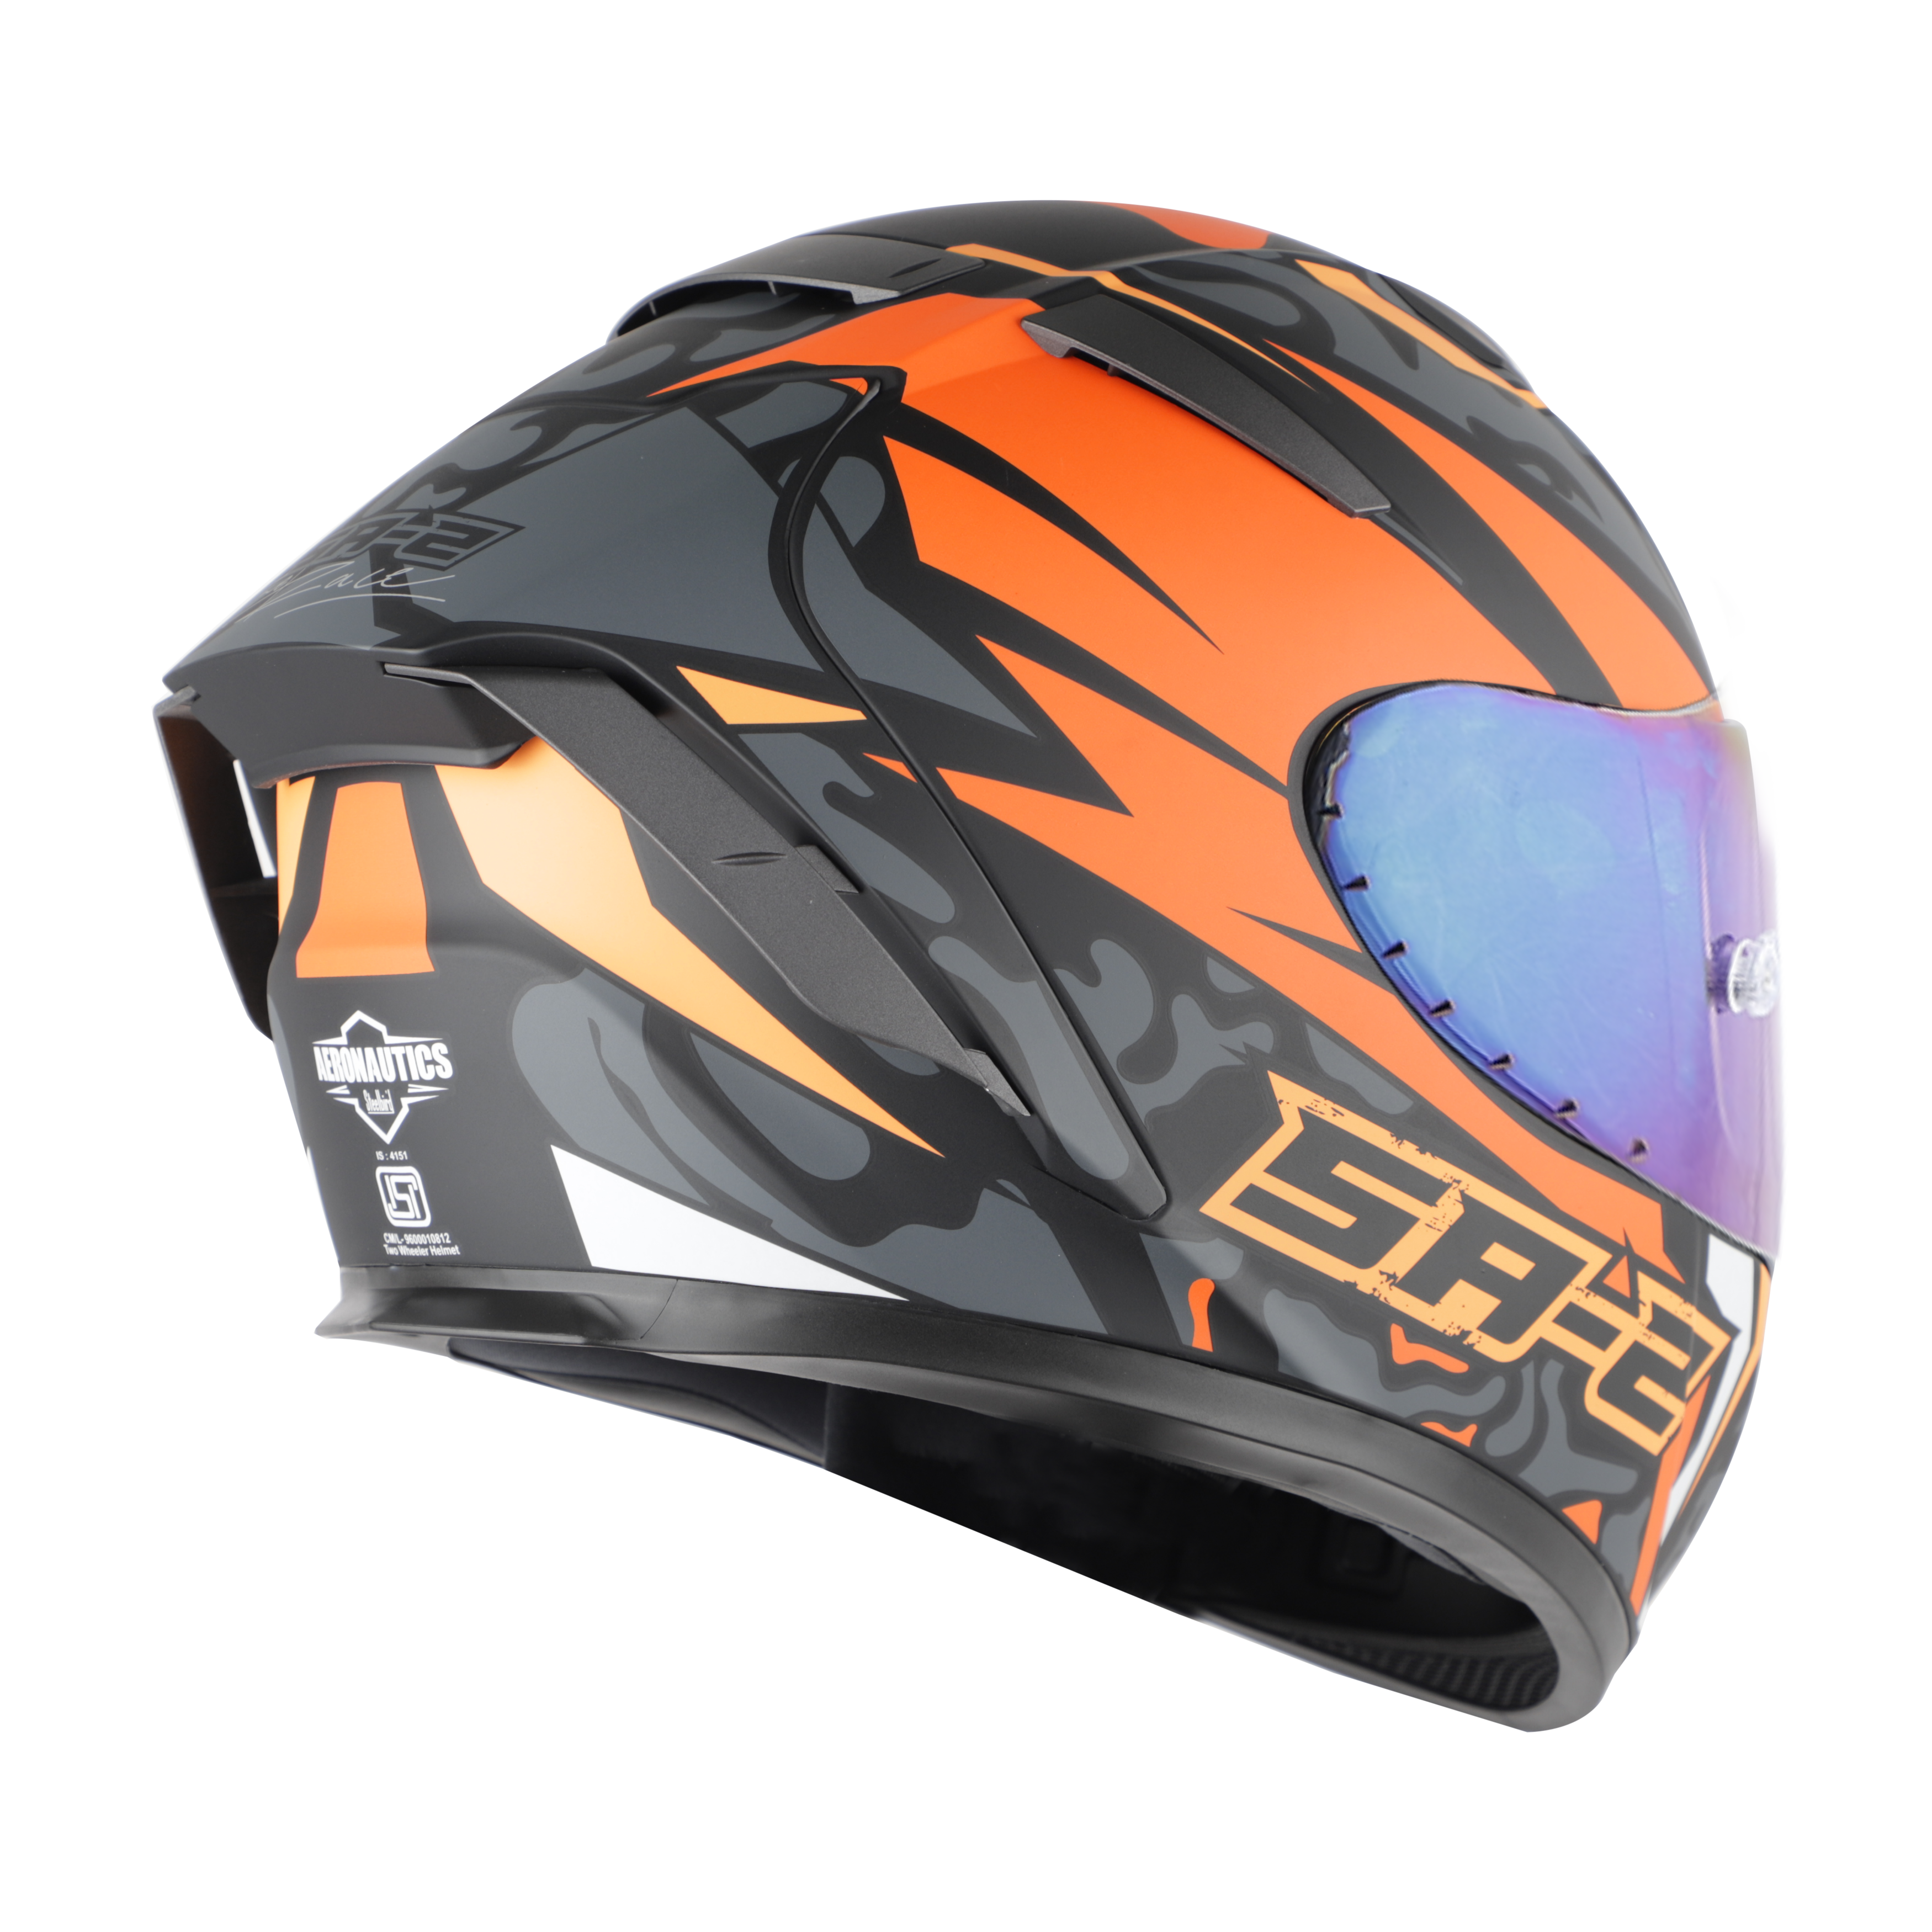 SA-2 TERMINATOR 3.0 GLOSSY BLACK WITH ORANGE FITTED WITH CLEAR VISOR EXTRA RAINBOW CHROME VISOR FREE (WITH ANTI-FOR SHIELD HOLDER)